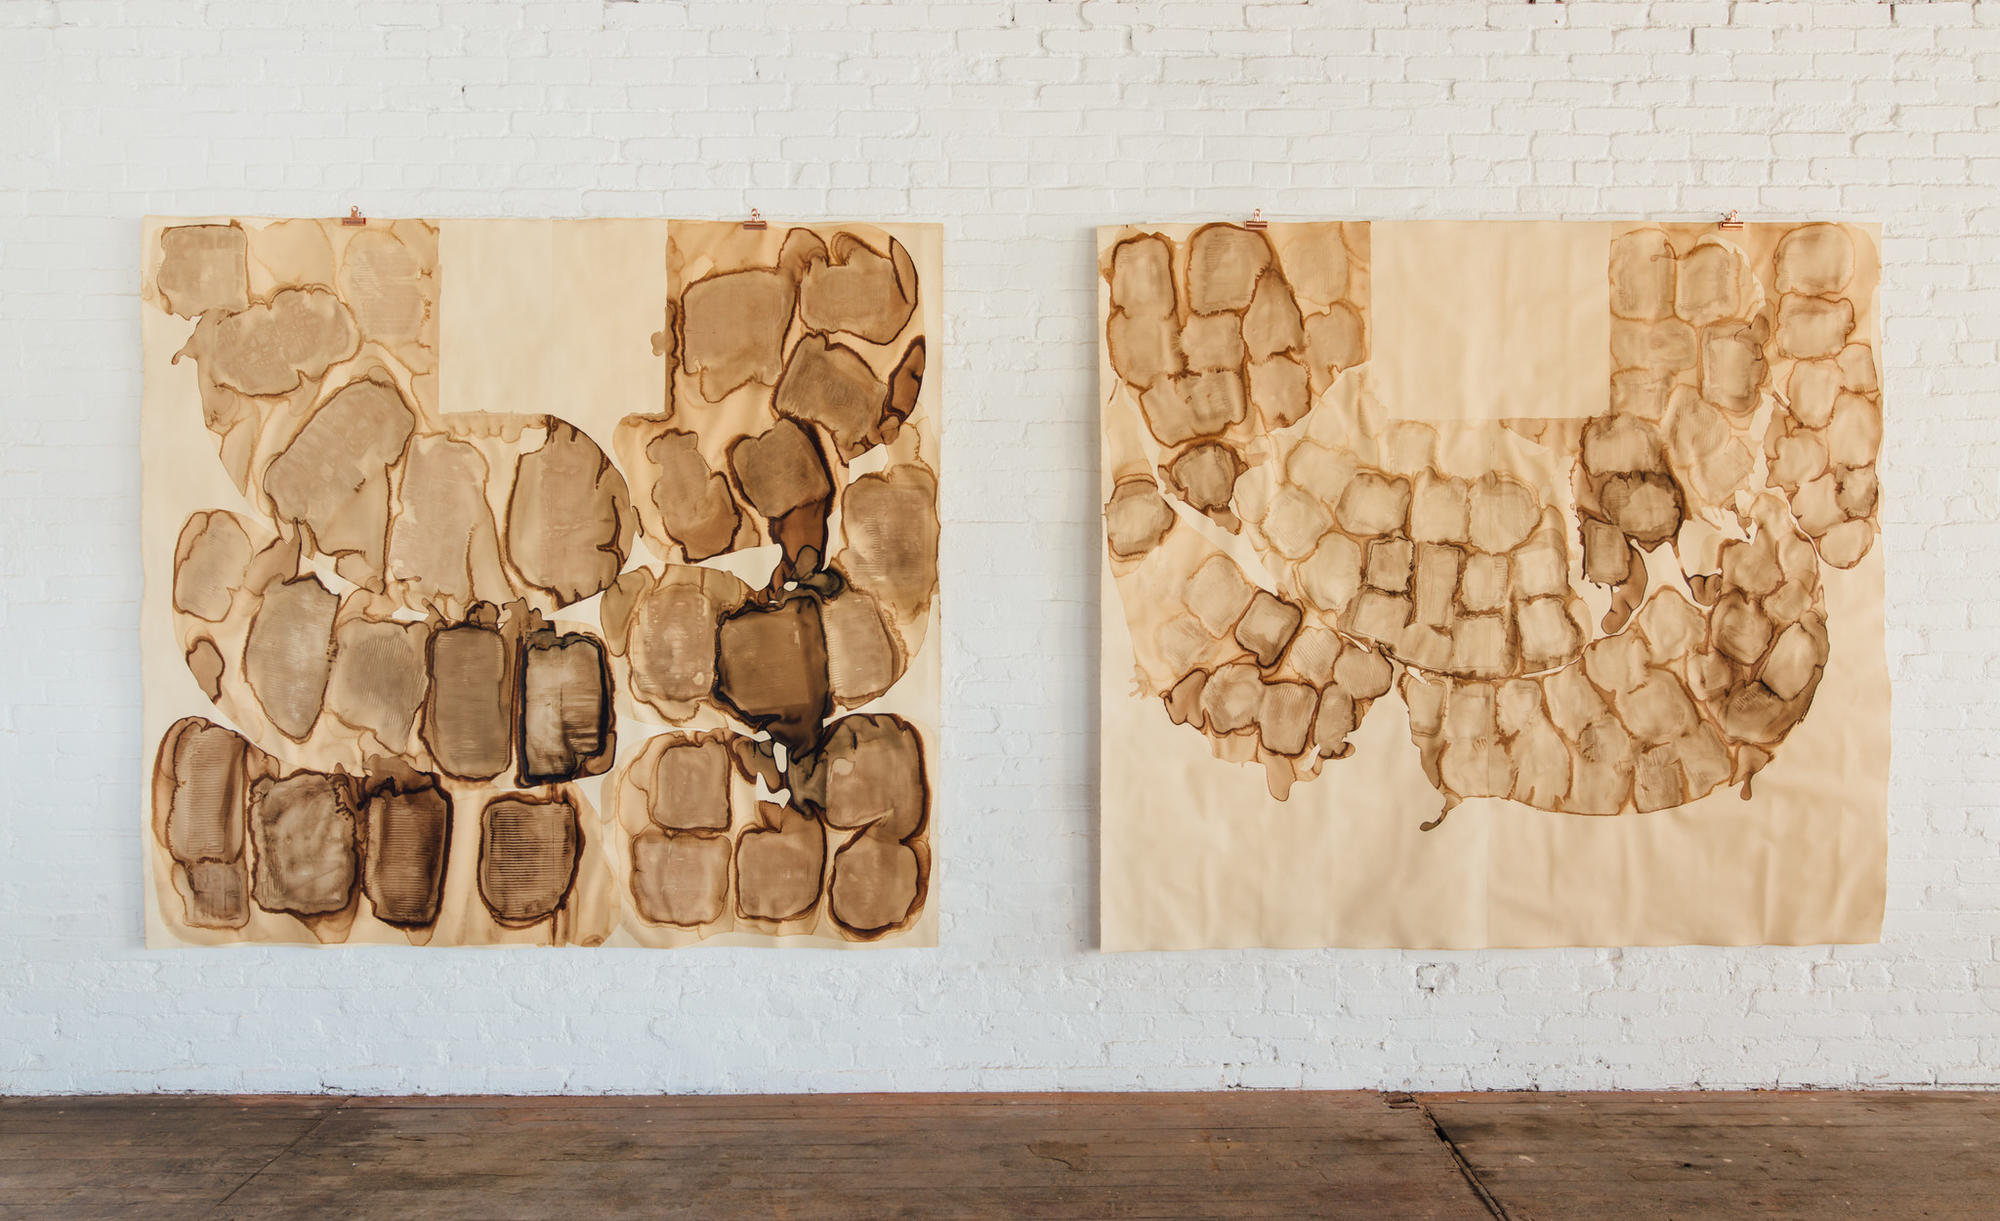 From a series titled "Arrangement of Wares" by Carmen Argote at Panel LA, made with coffee on paper.